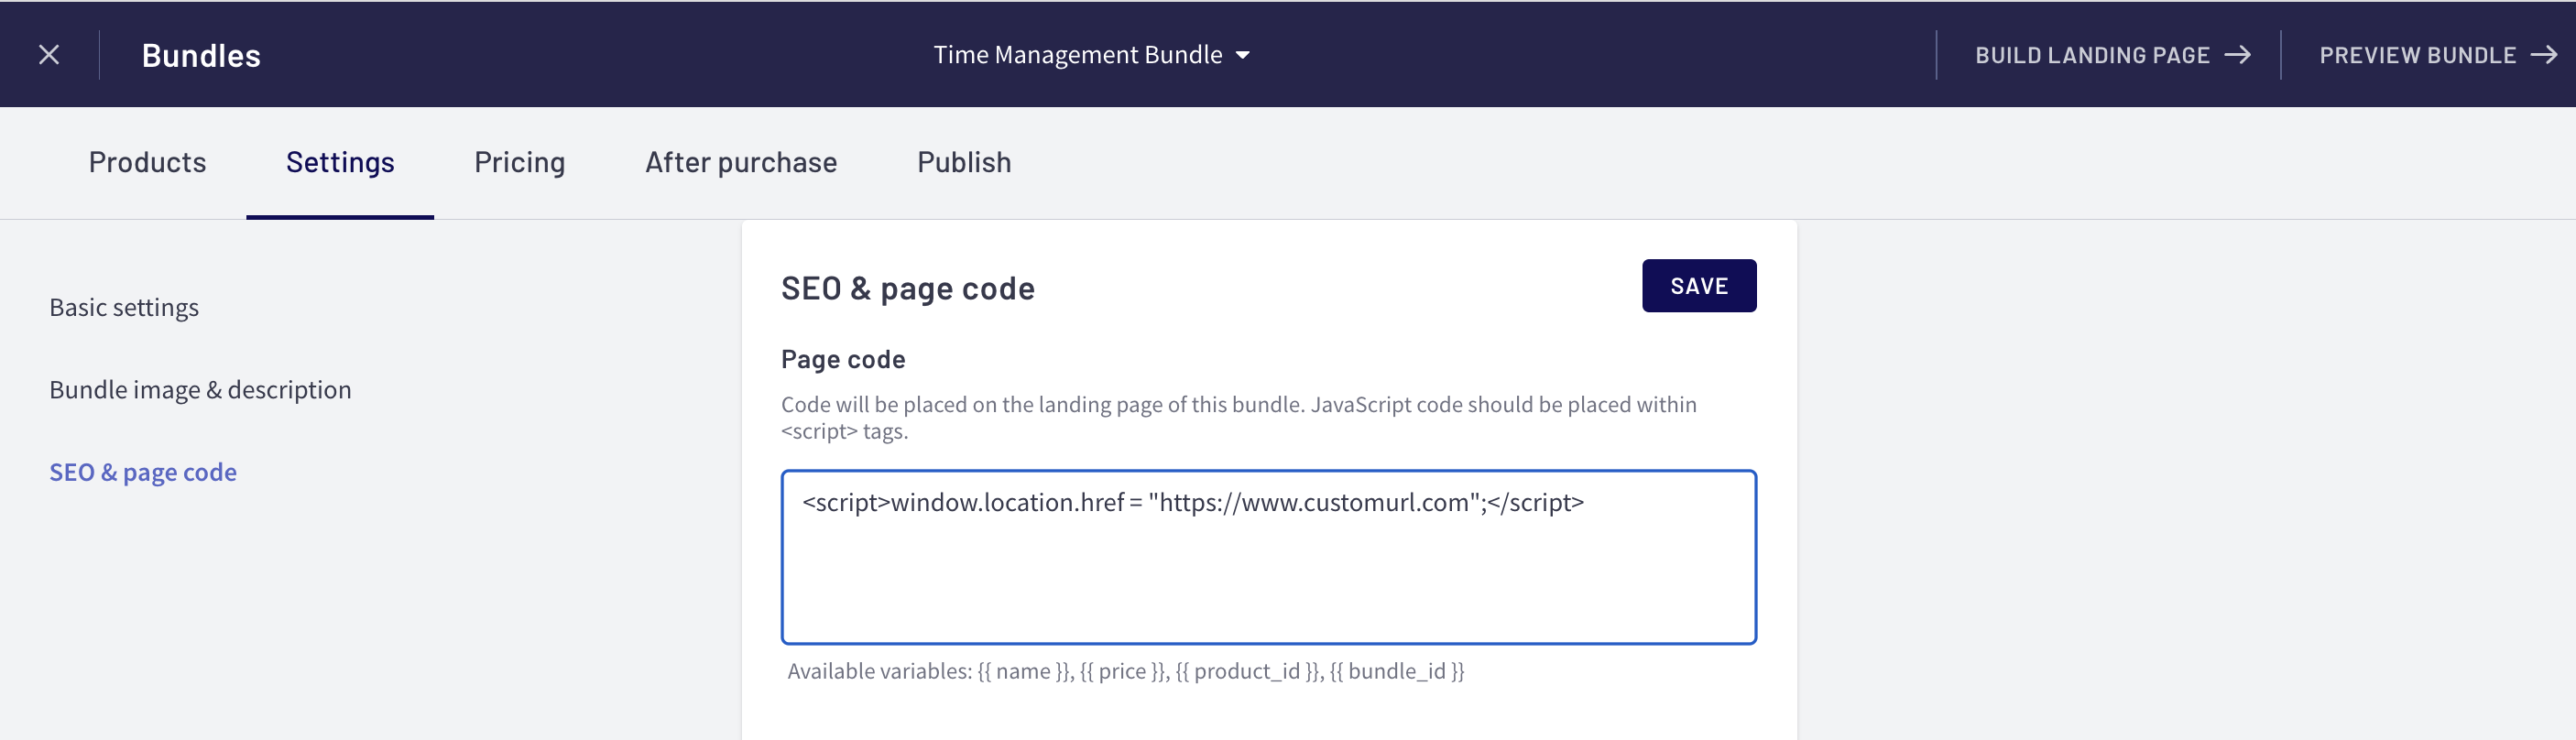 Bundle_page_redirect.png